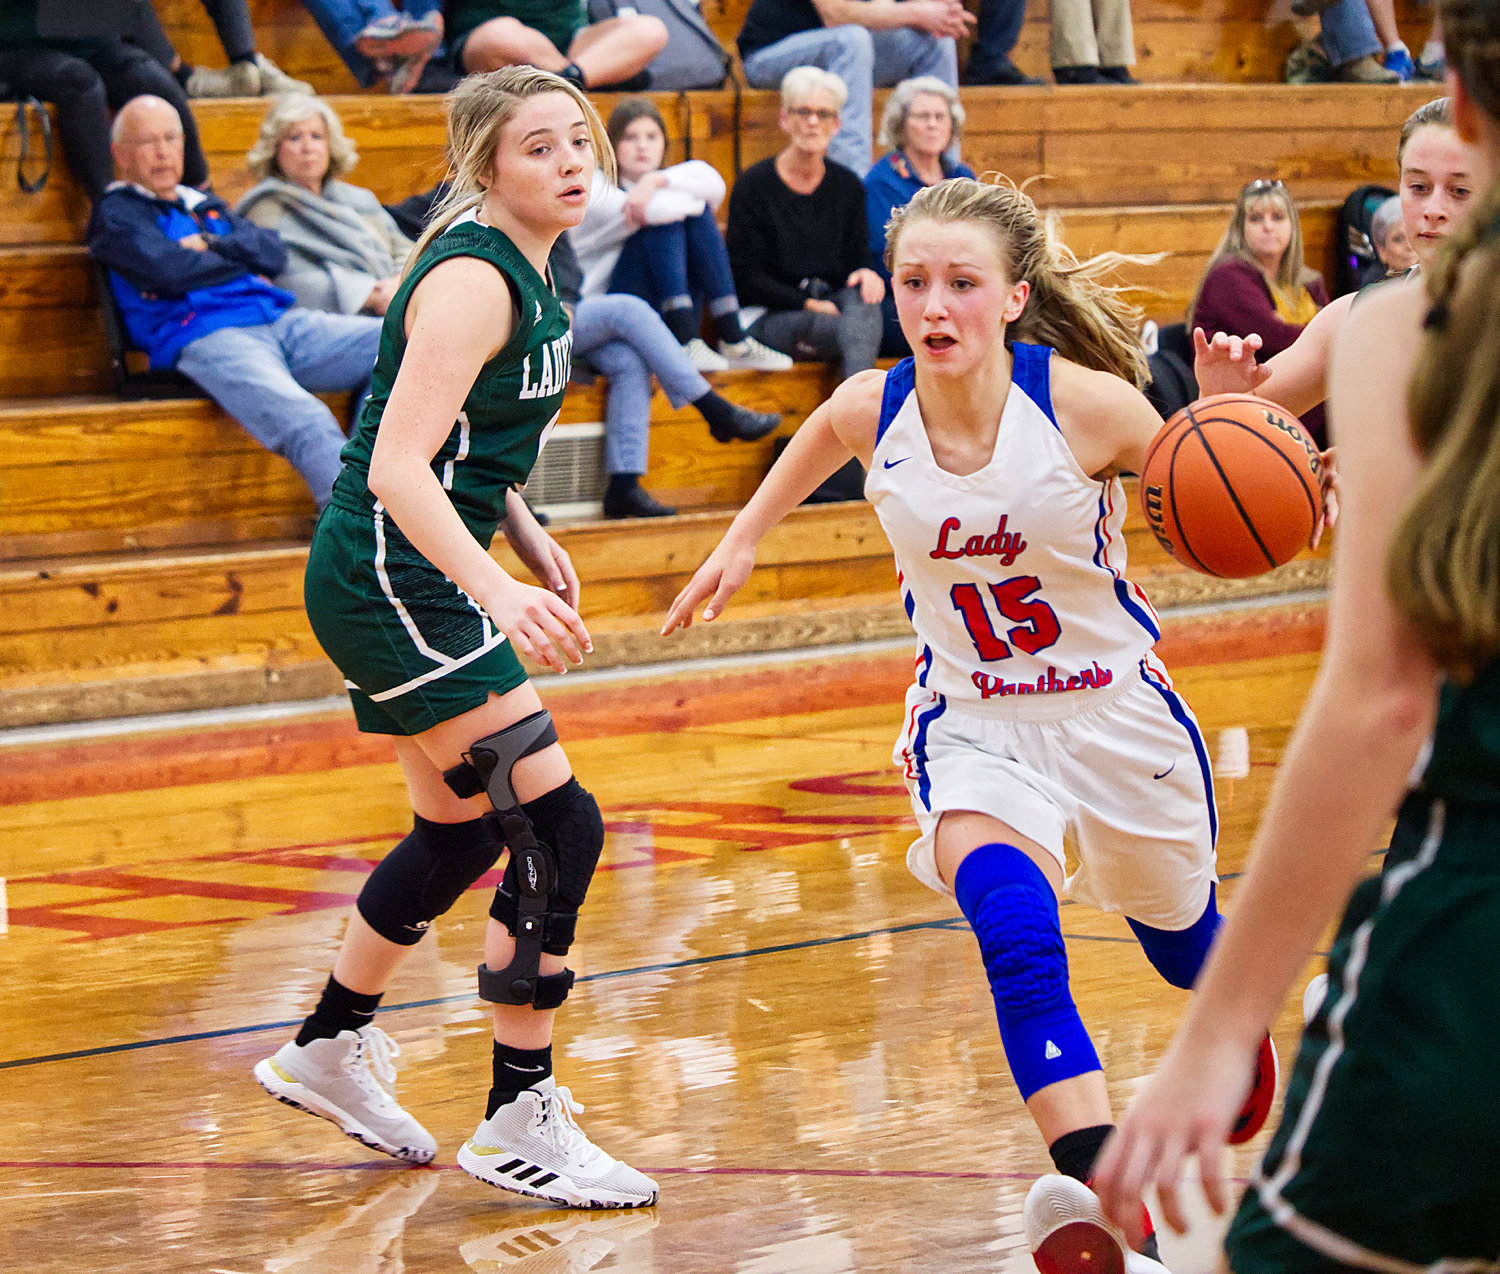 Bella Crawford (15) drives to the basket to score two of her fifteen points on the evening.